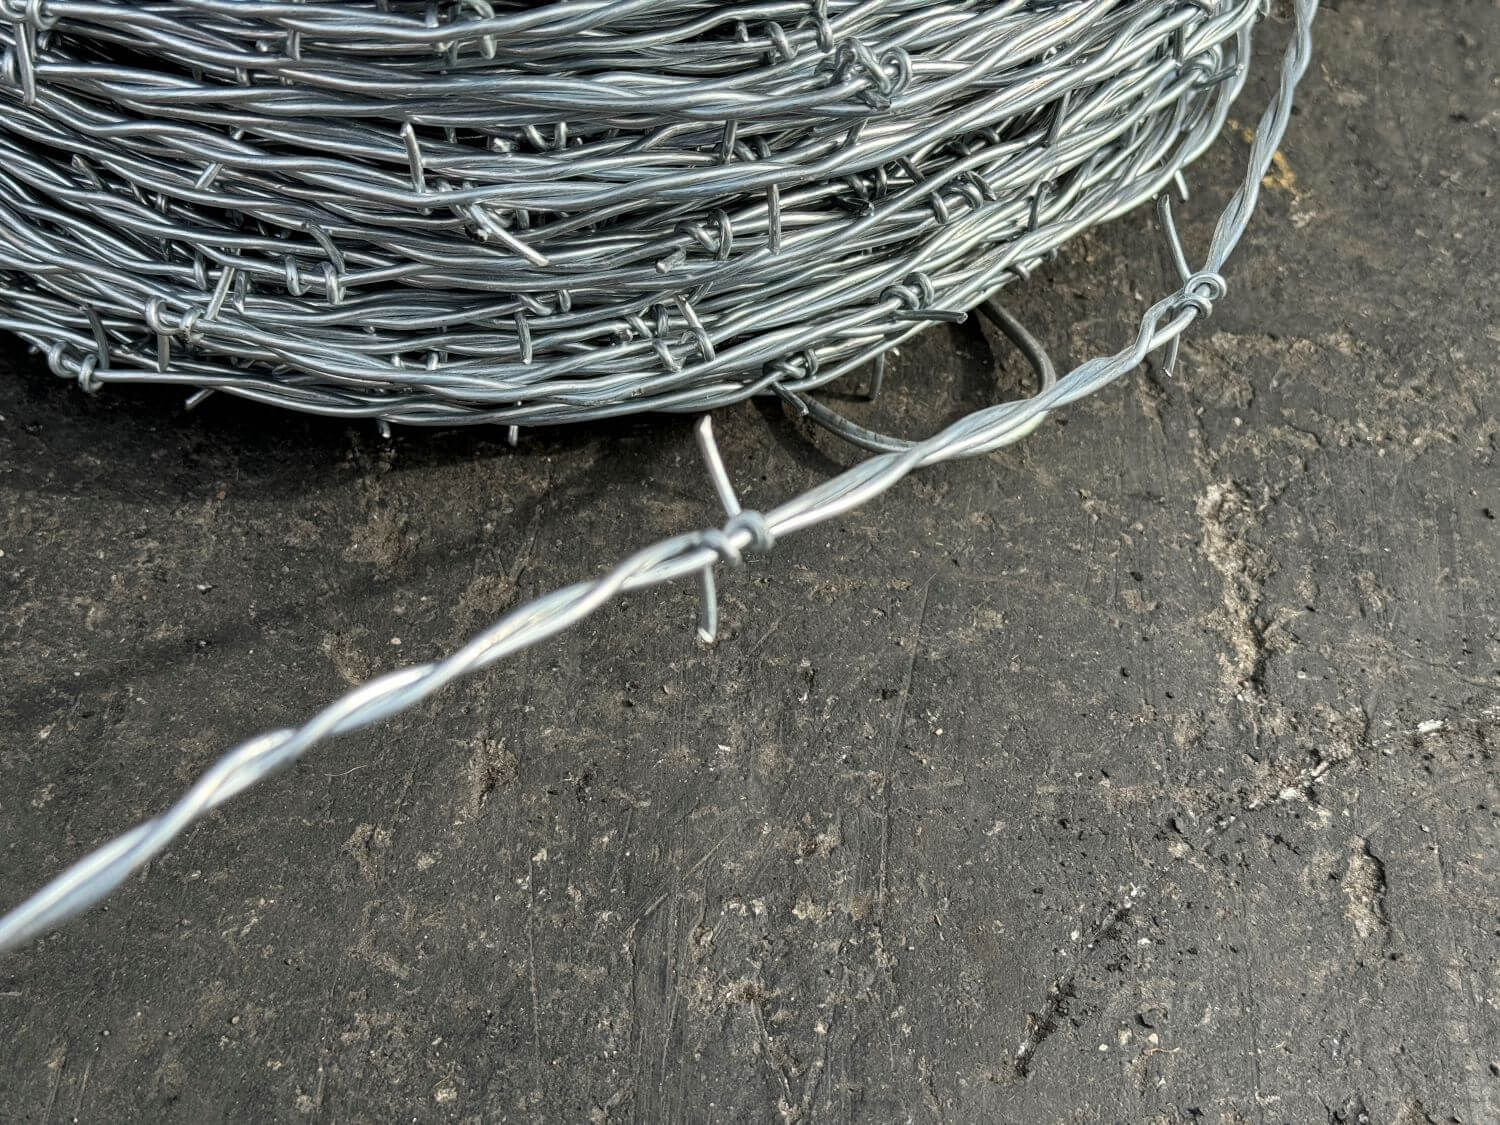 Barbless Wire Roll - Twisted Fence Wire - 12.5 Gauge Galvanized Steel